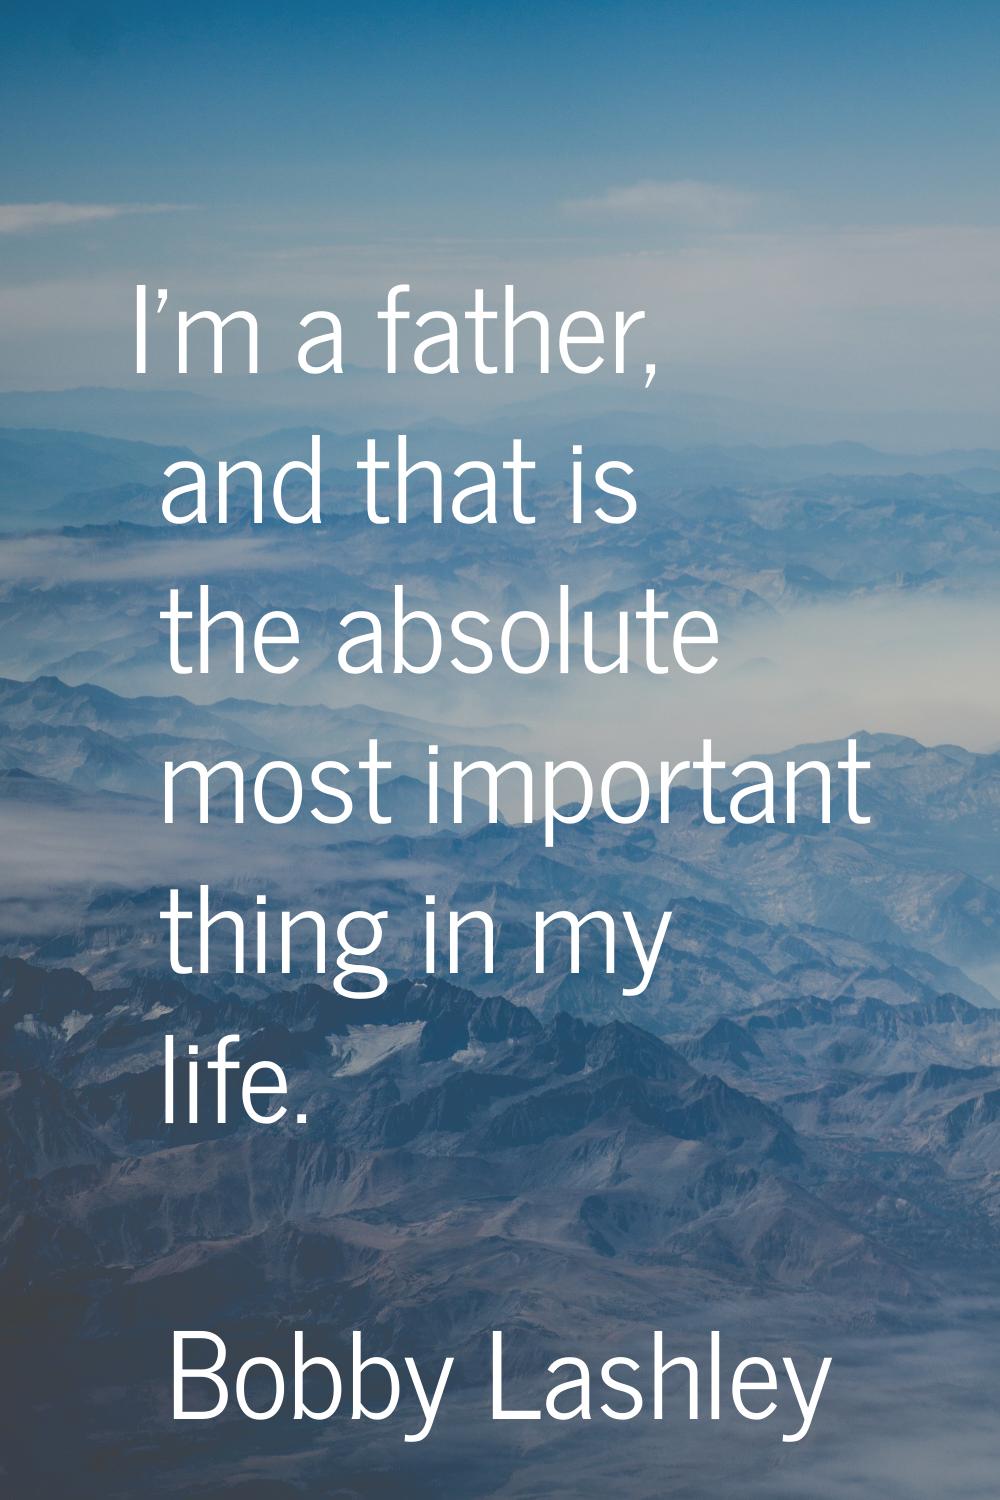 I'm a father, and that is the absolute most important thing in my life.